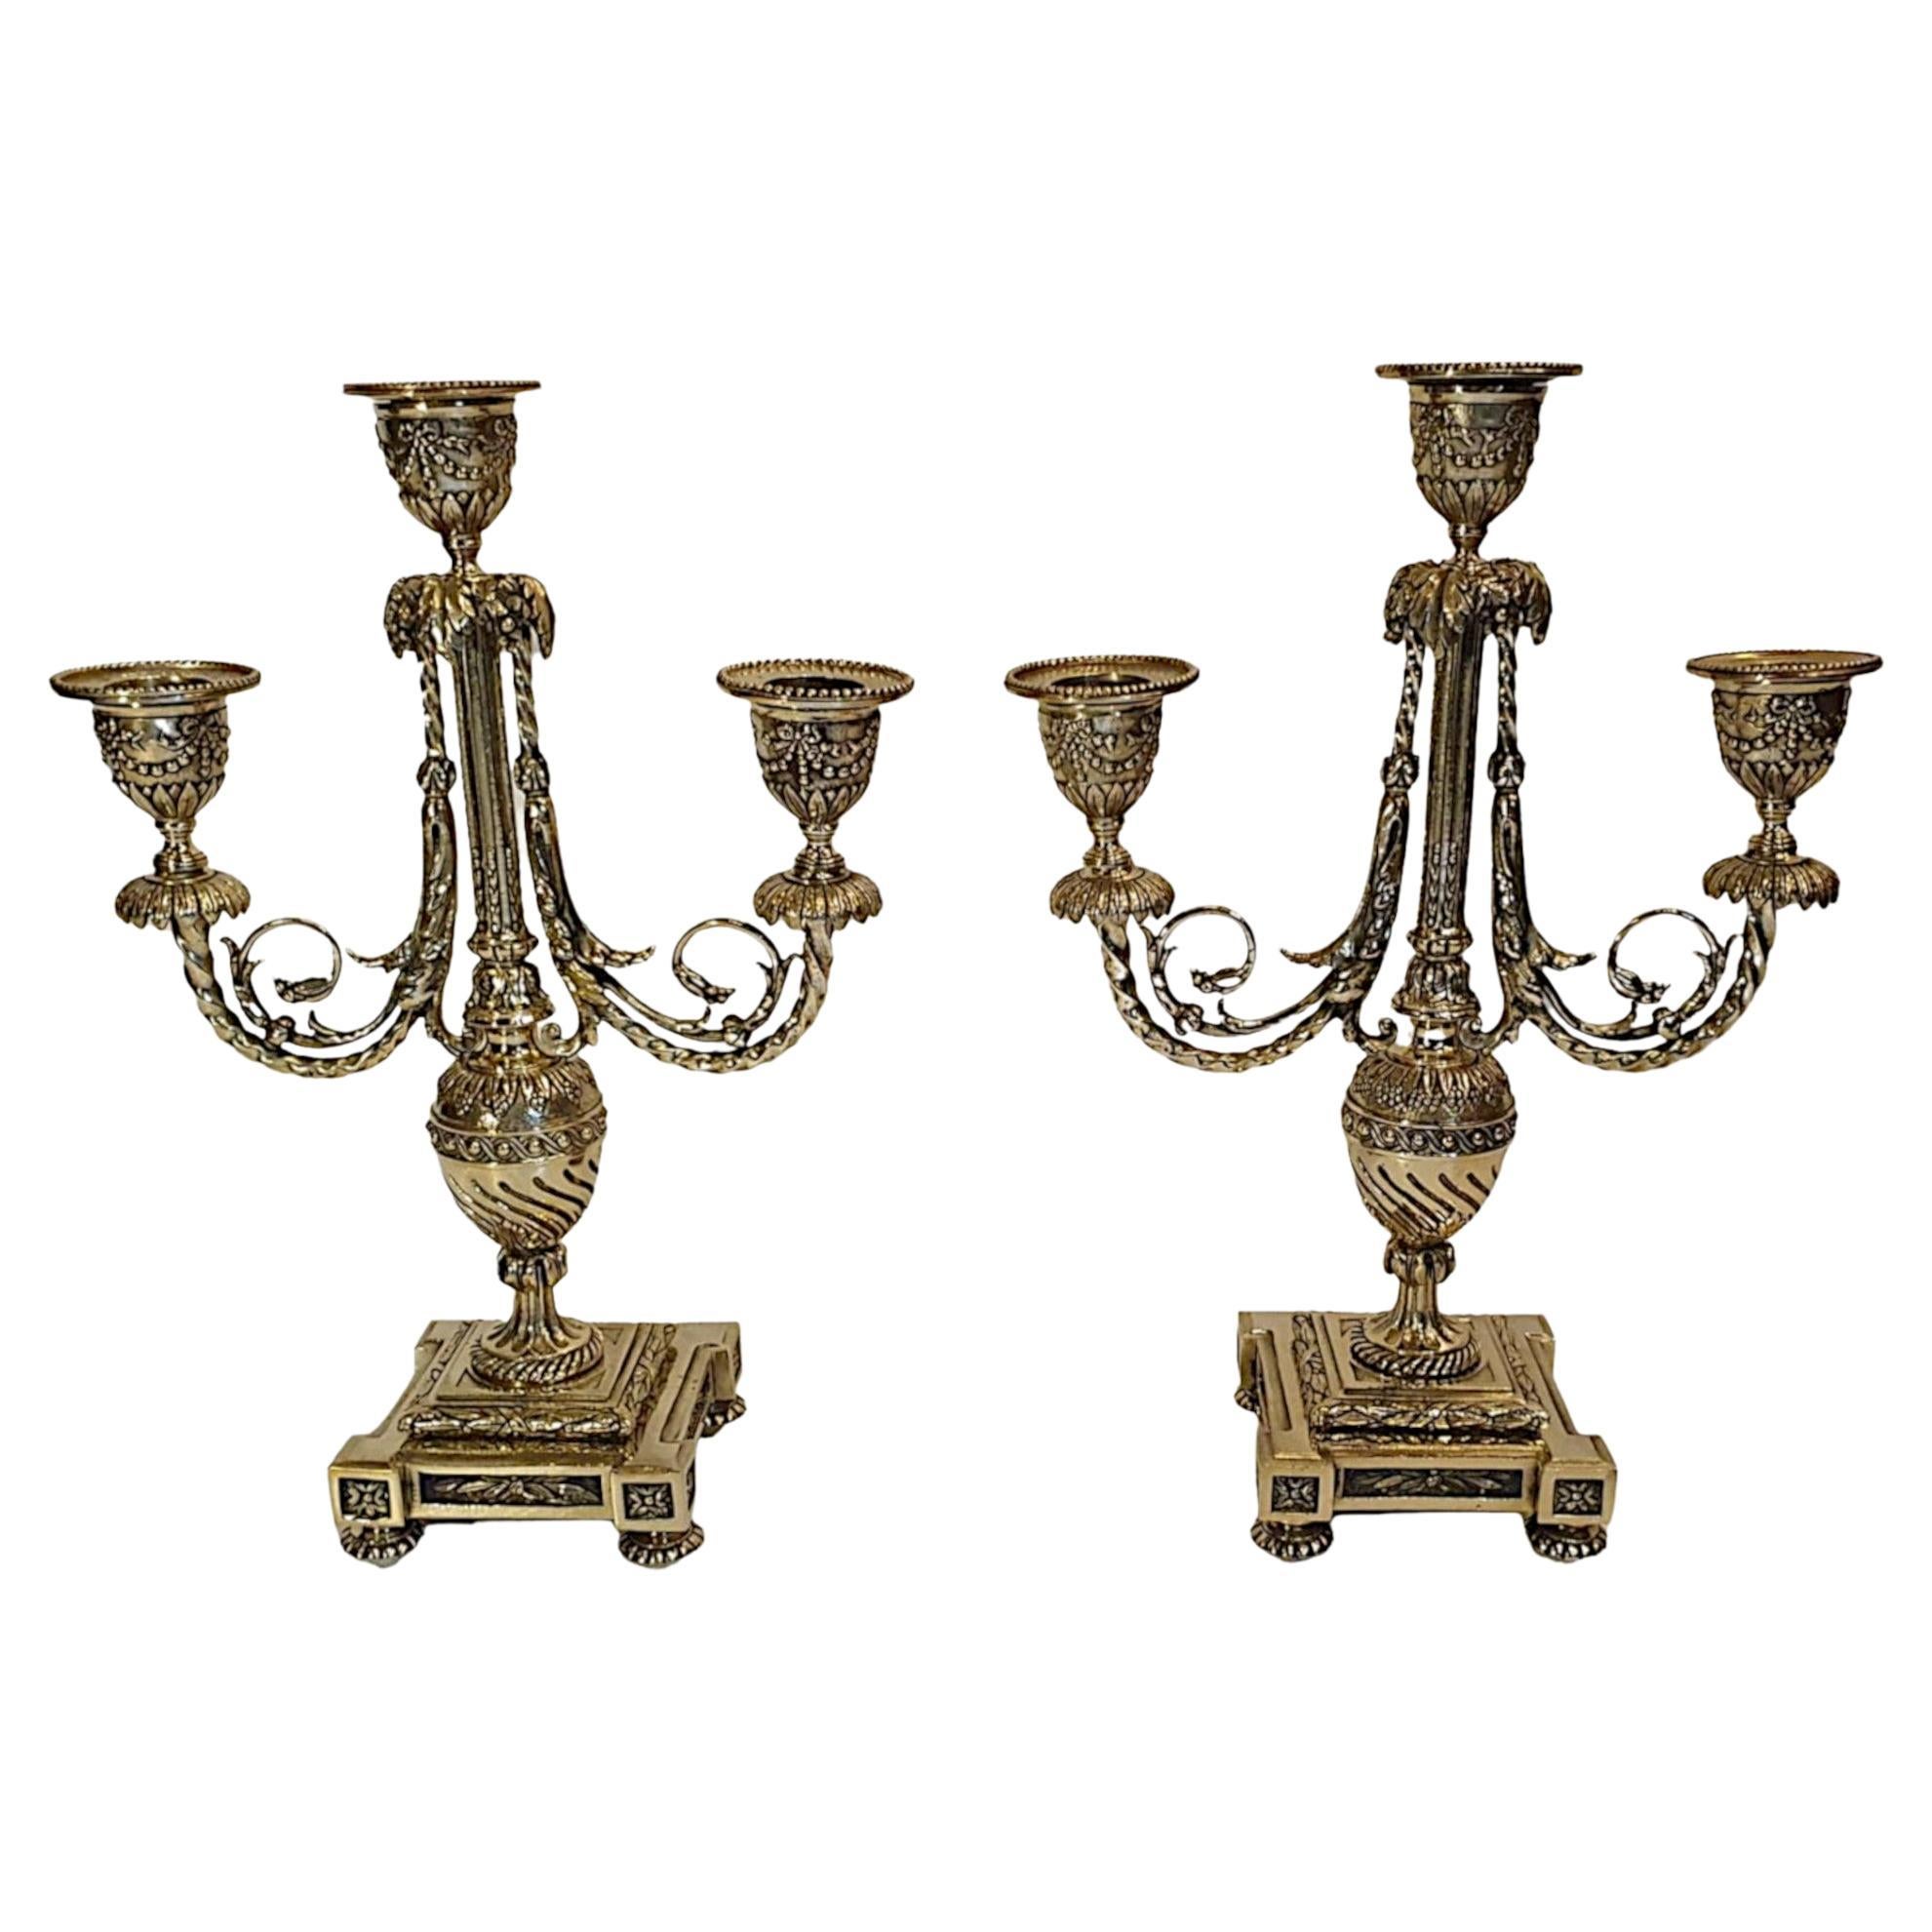 Gorgeous Quality Pair of 19th Century Polished Brass Three Branch Can-Delabra For Sale